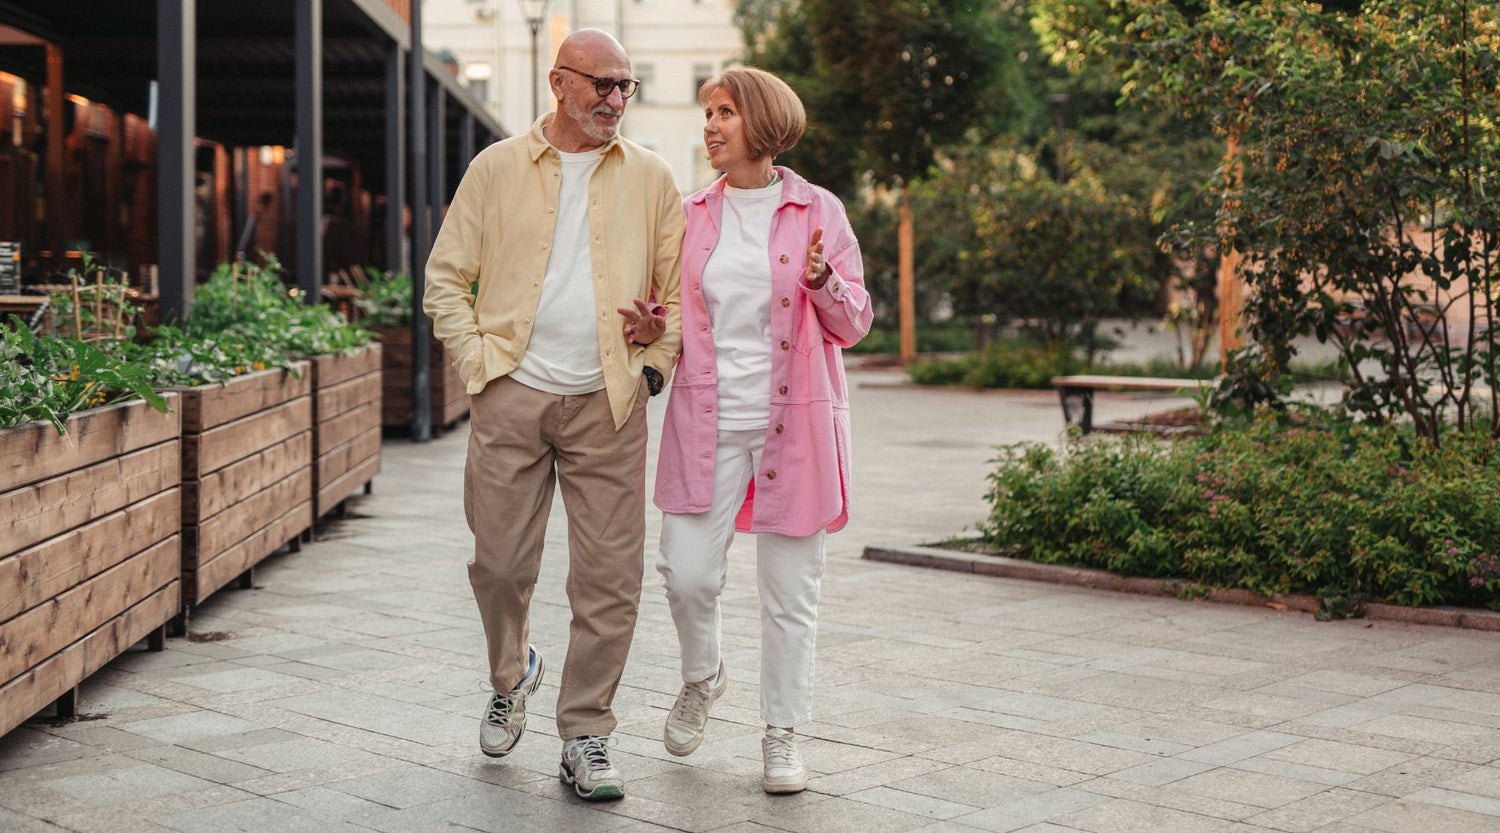 Happy and healthy elderly couple holding arms while walking outdoors